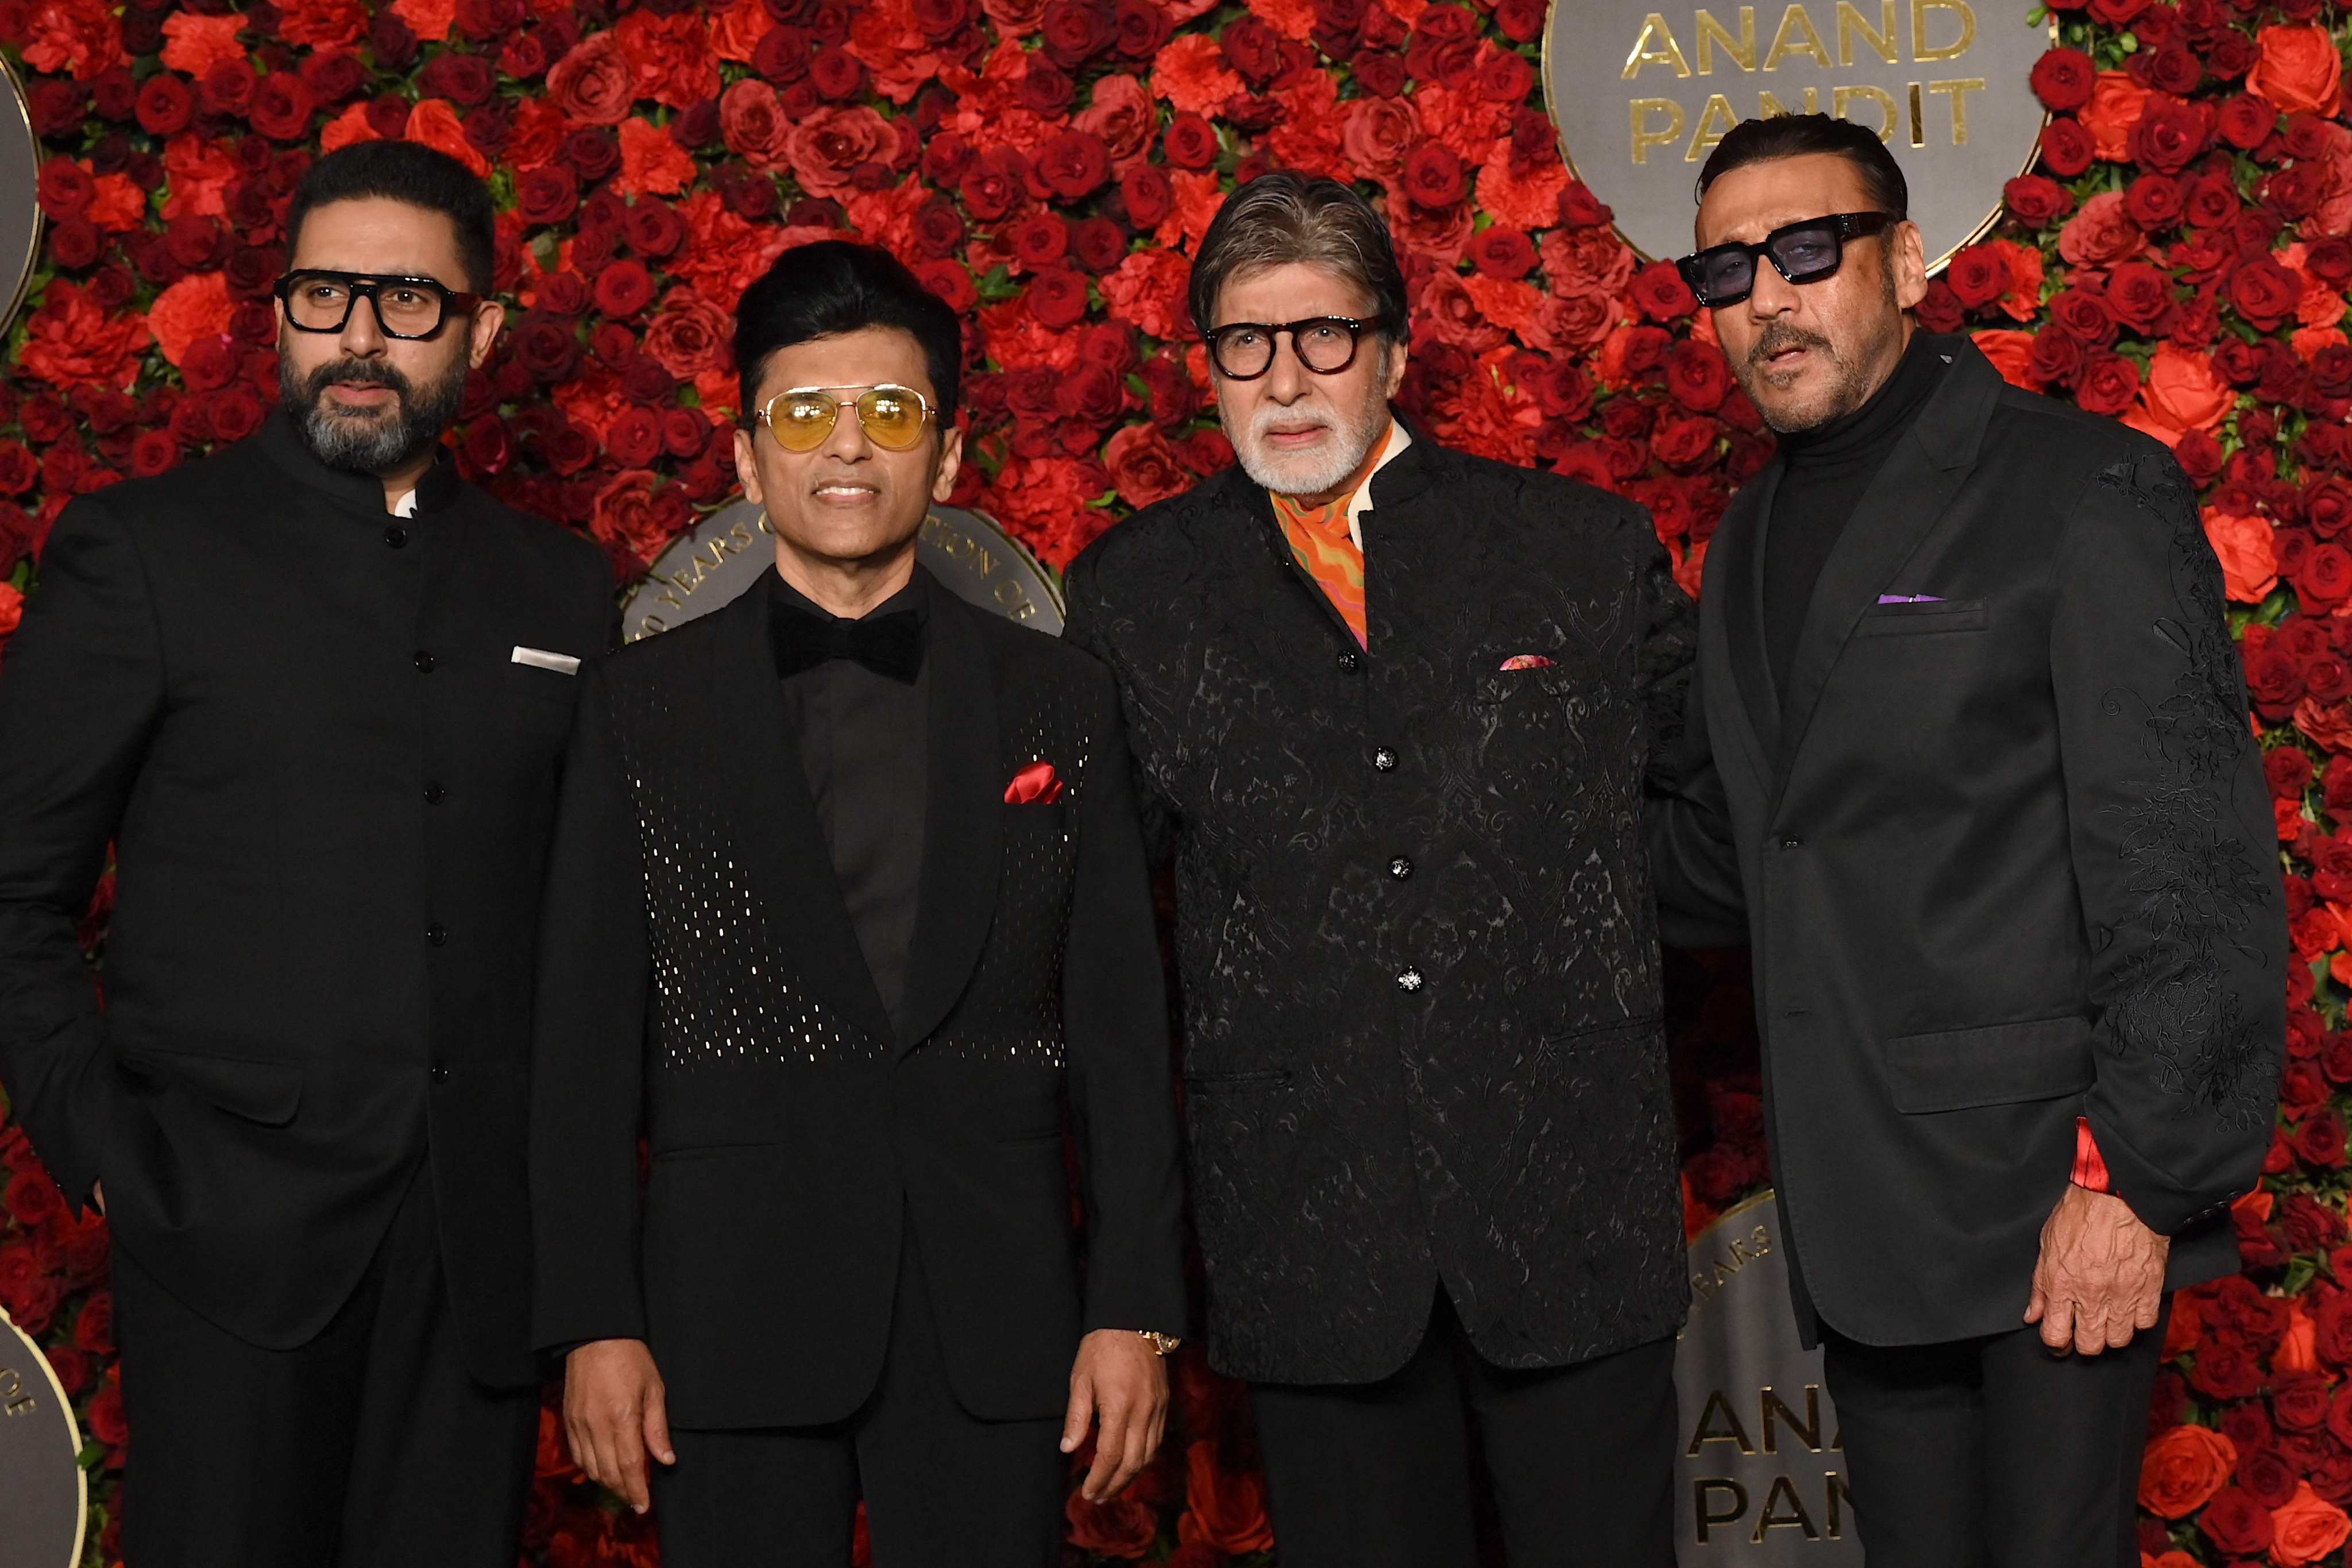 Bollywood actors Abhishek Bachchan (first from left), Amitabh Bachchan (second from right) and Jackie Shroff (first from right) attend Indian film producer Anand Pandit’s (second from left) 60th birthday party in Mumbai on December 21. Photo: AFP